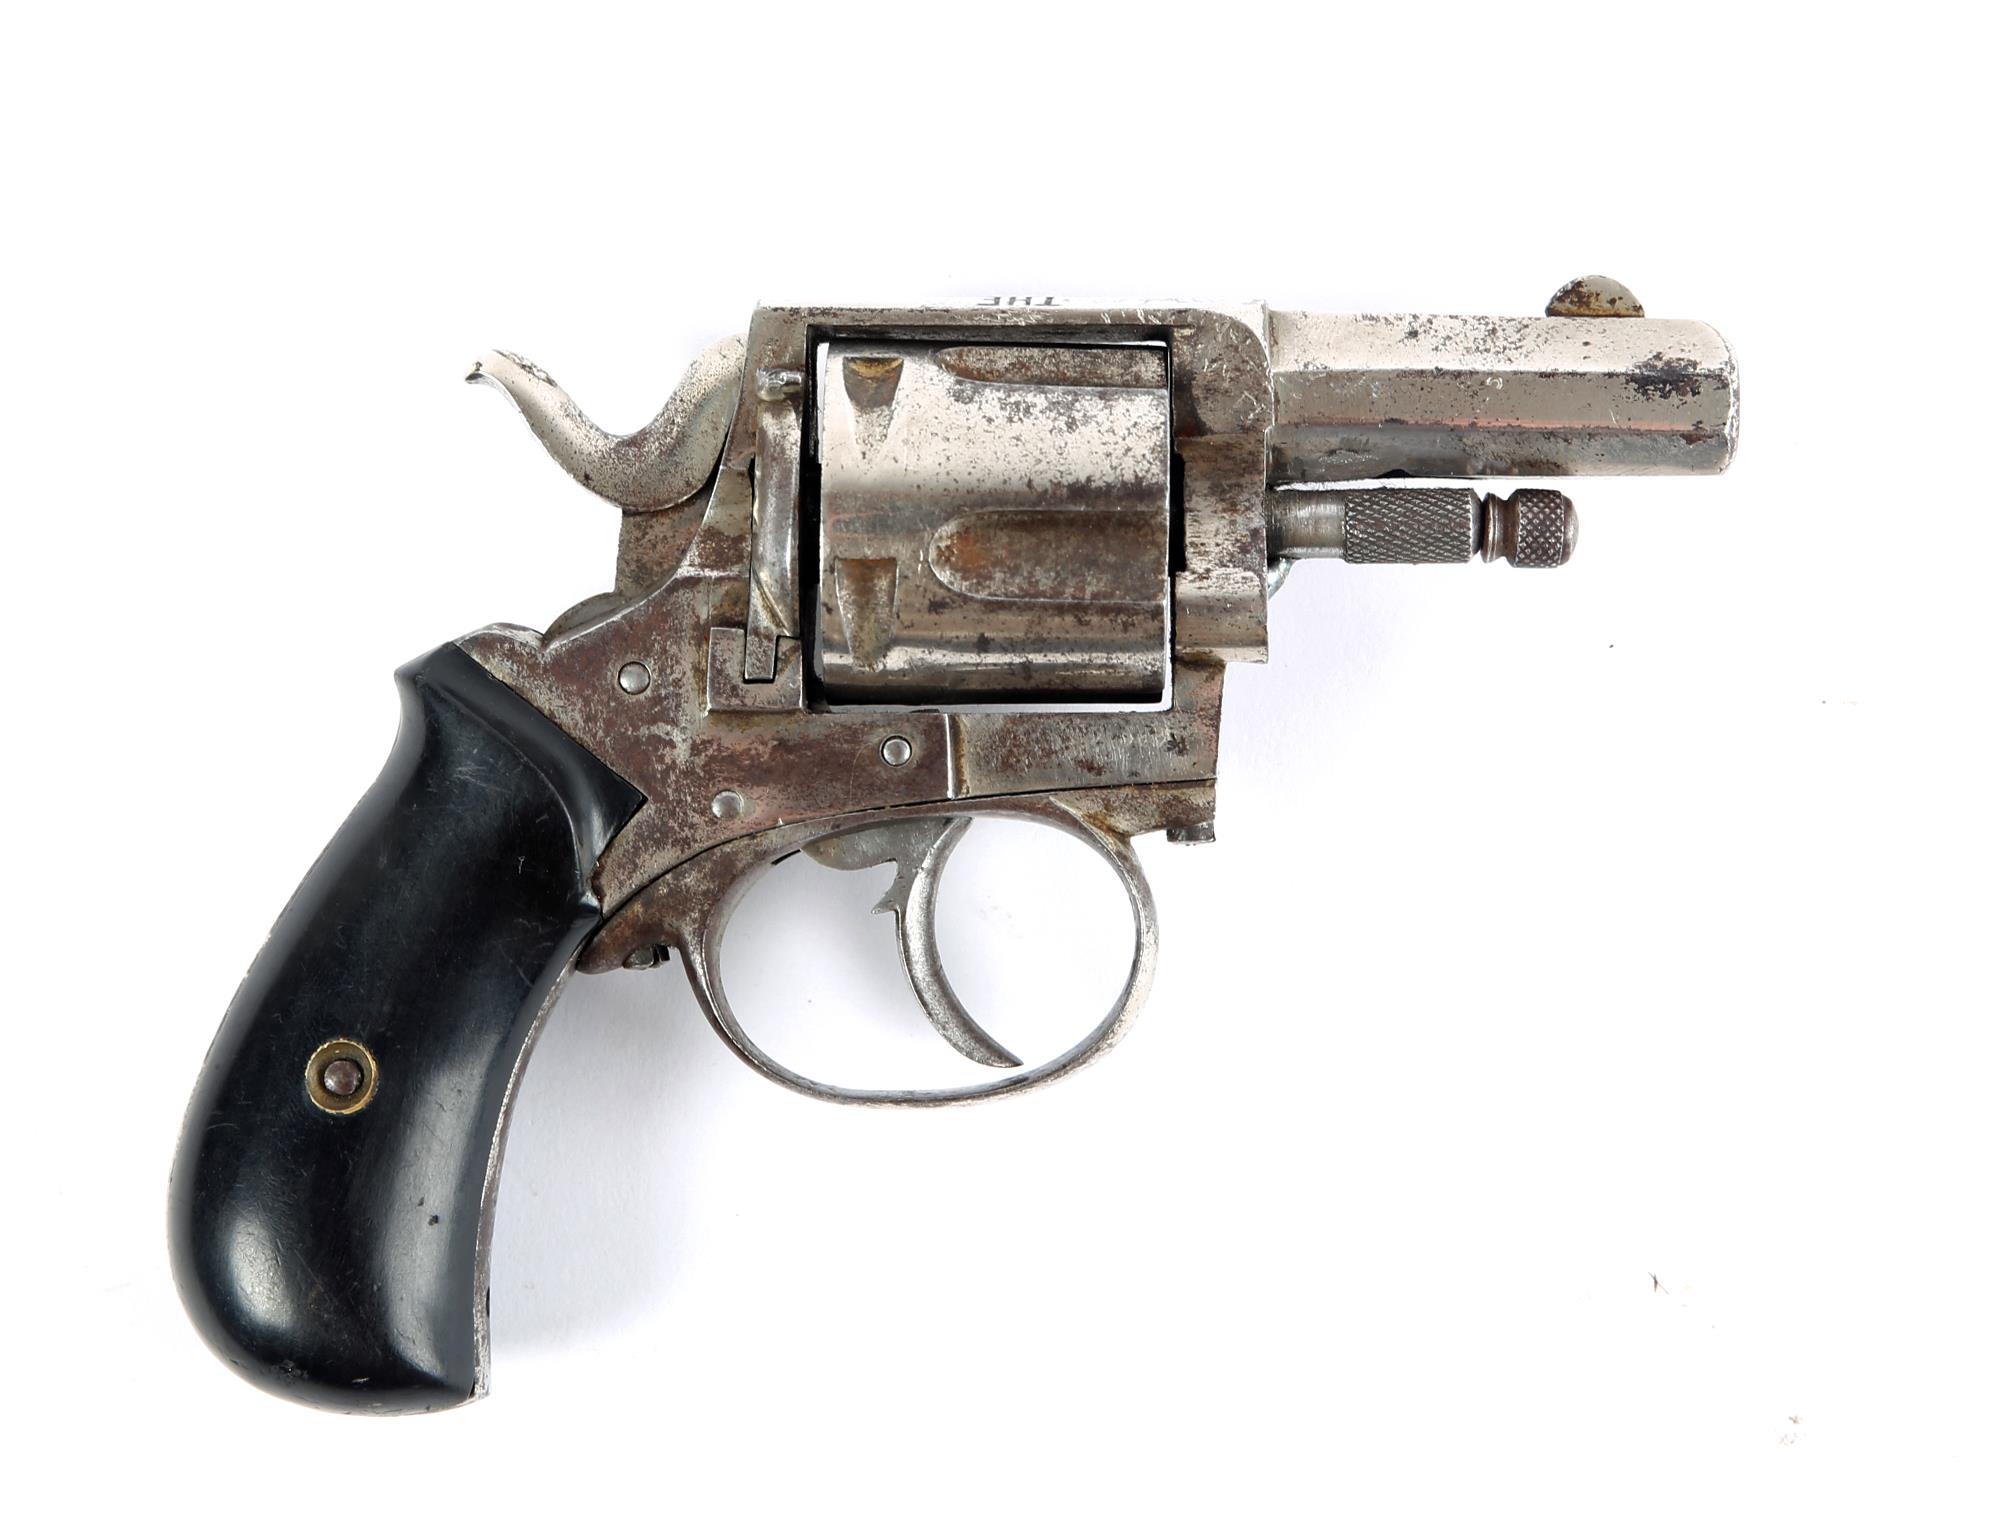 1916 Rising volunteer's revolver. A nickle plated, .38 caliber 'Bull-Dog' revolver by Ward and